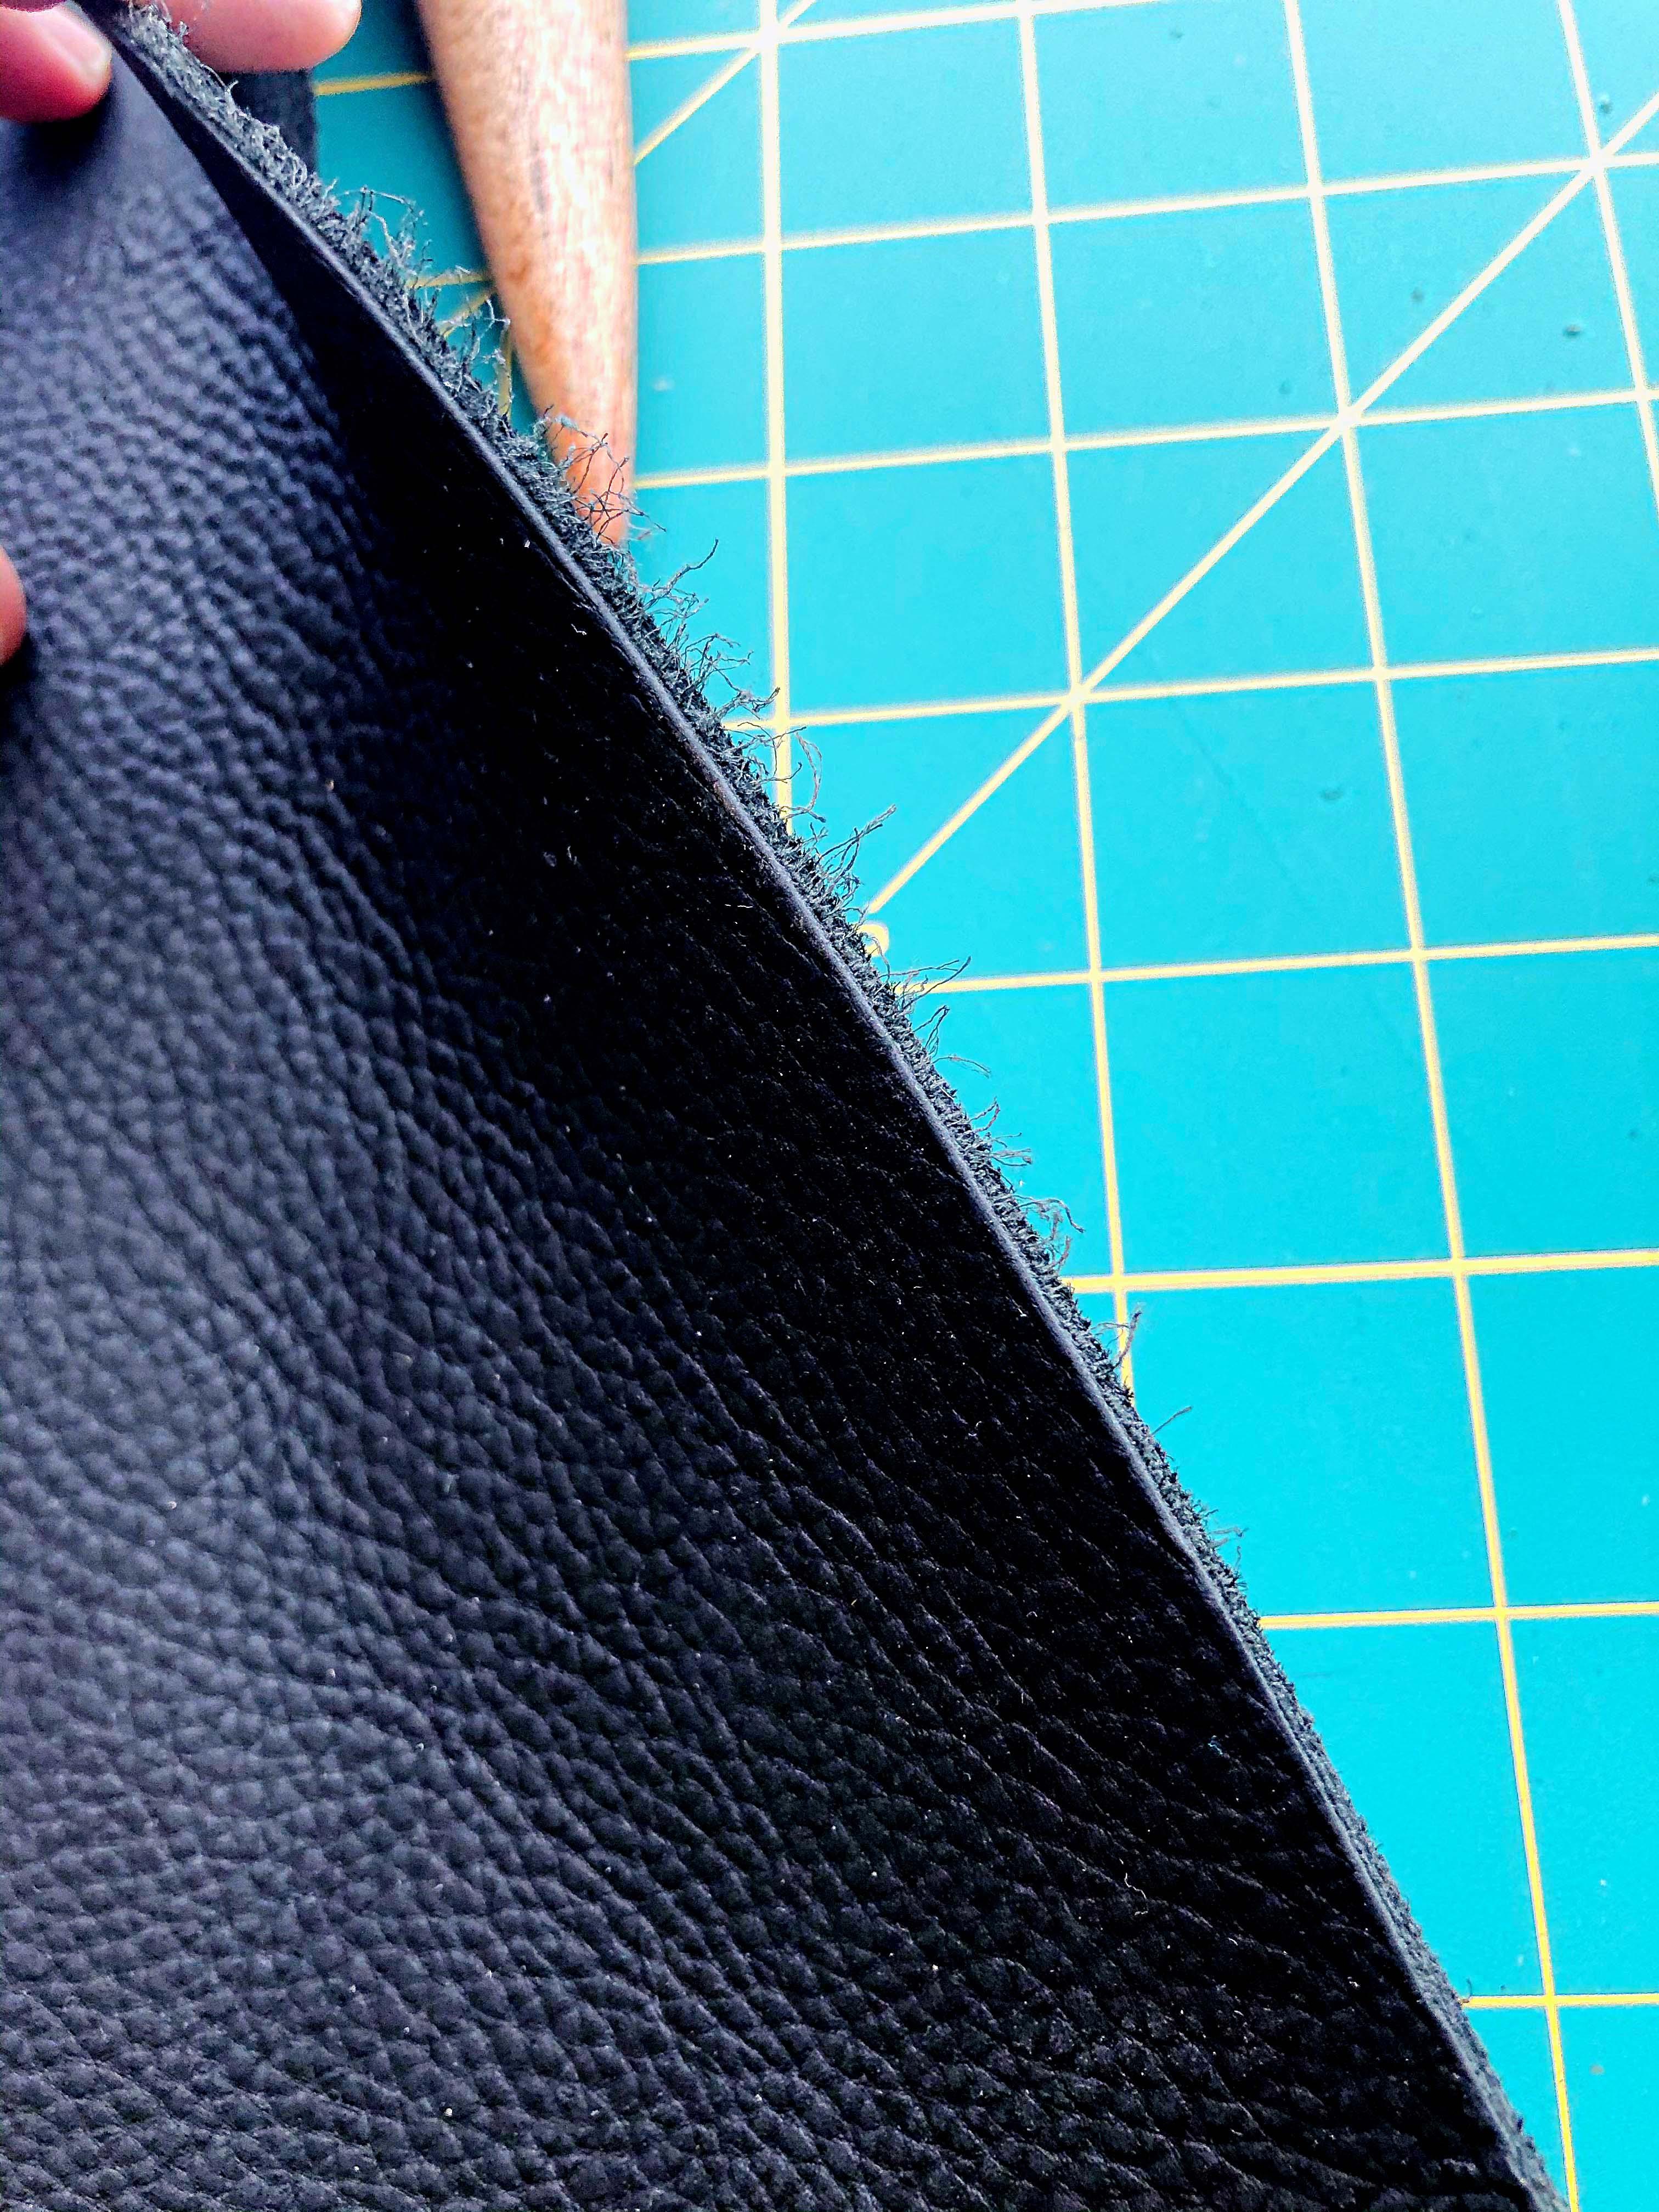 Project idea's for thin leather - How Do I Do That